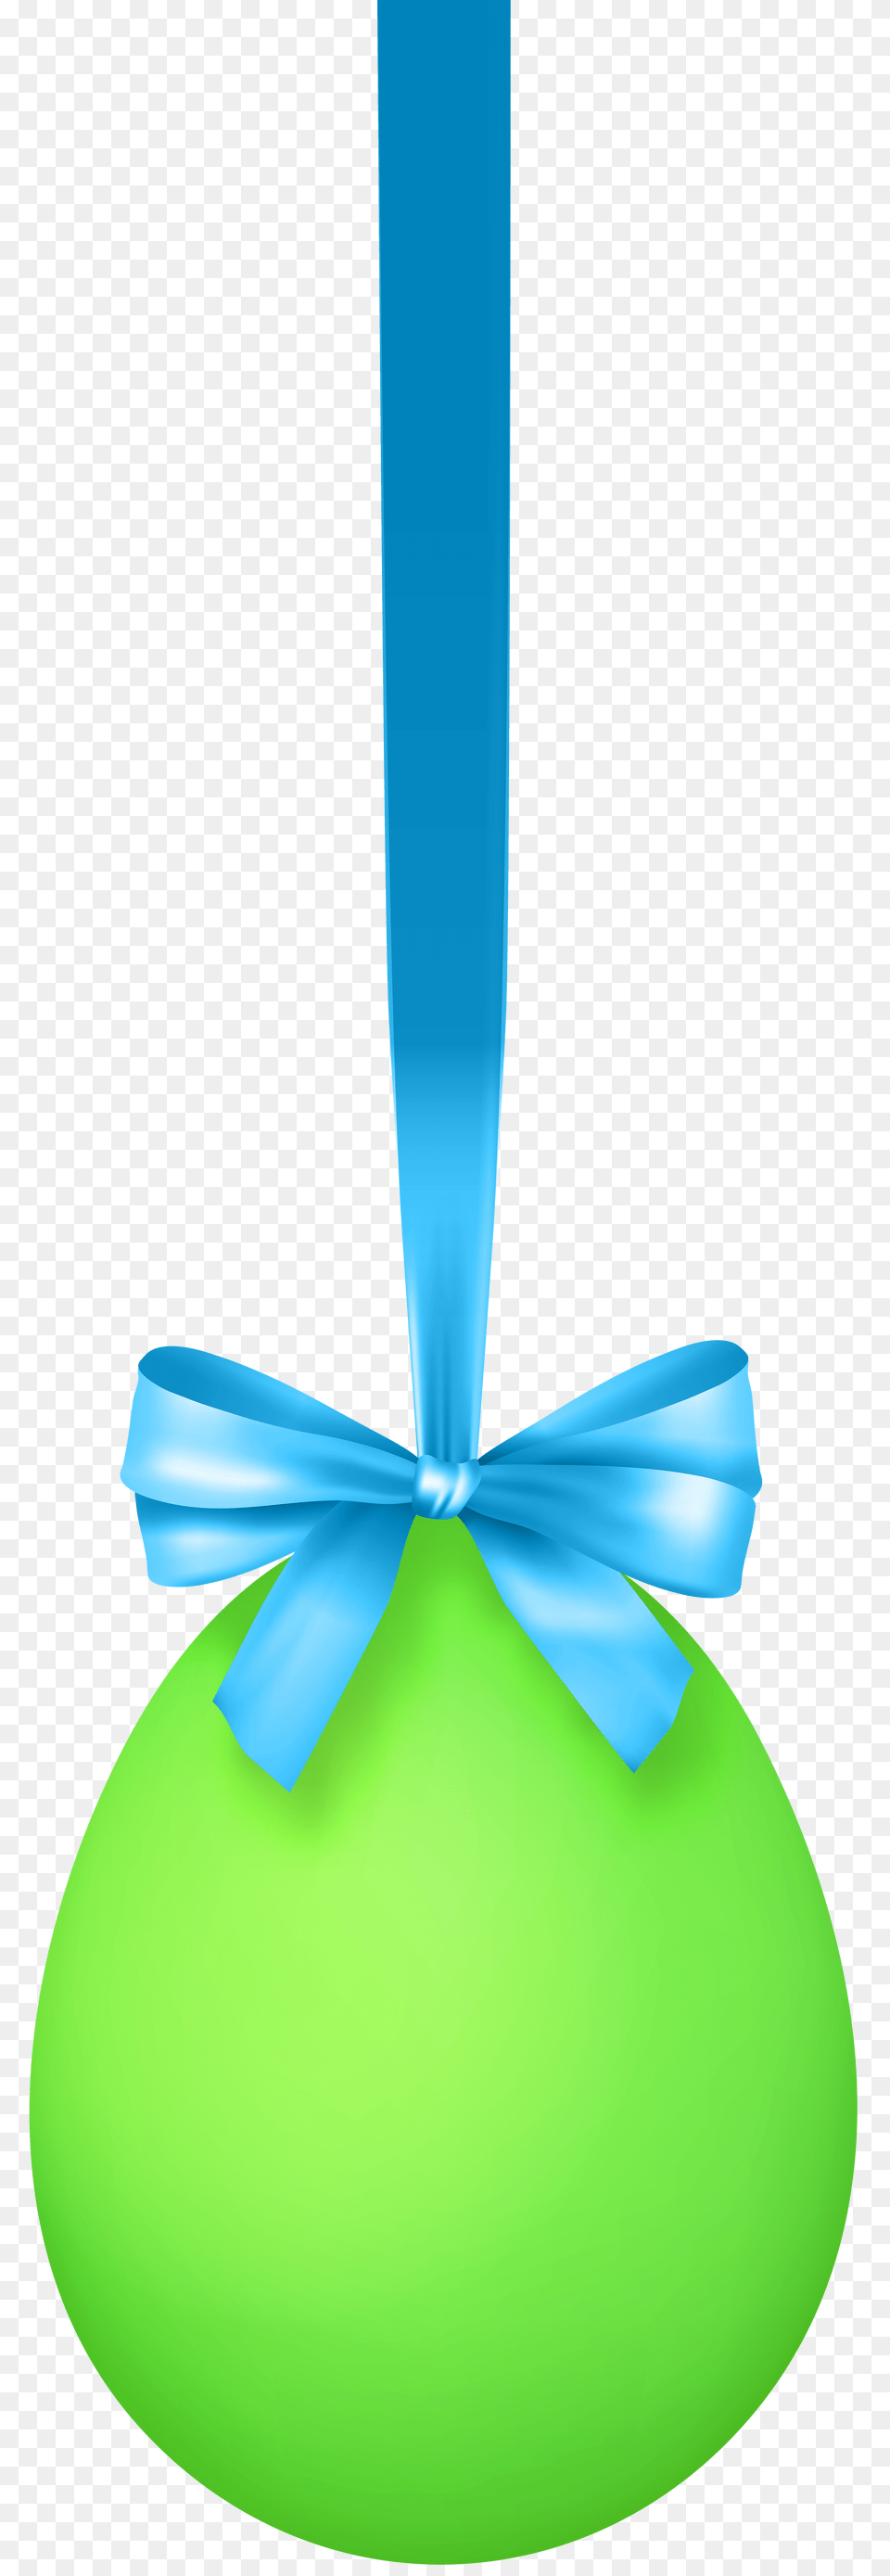 Green Hanging Easter Egg With Bow Transparent Clip Art Image, Gift Free Png Download